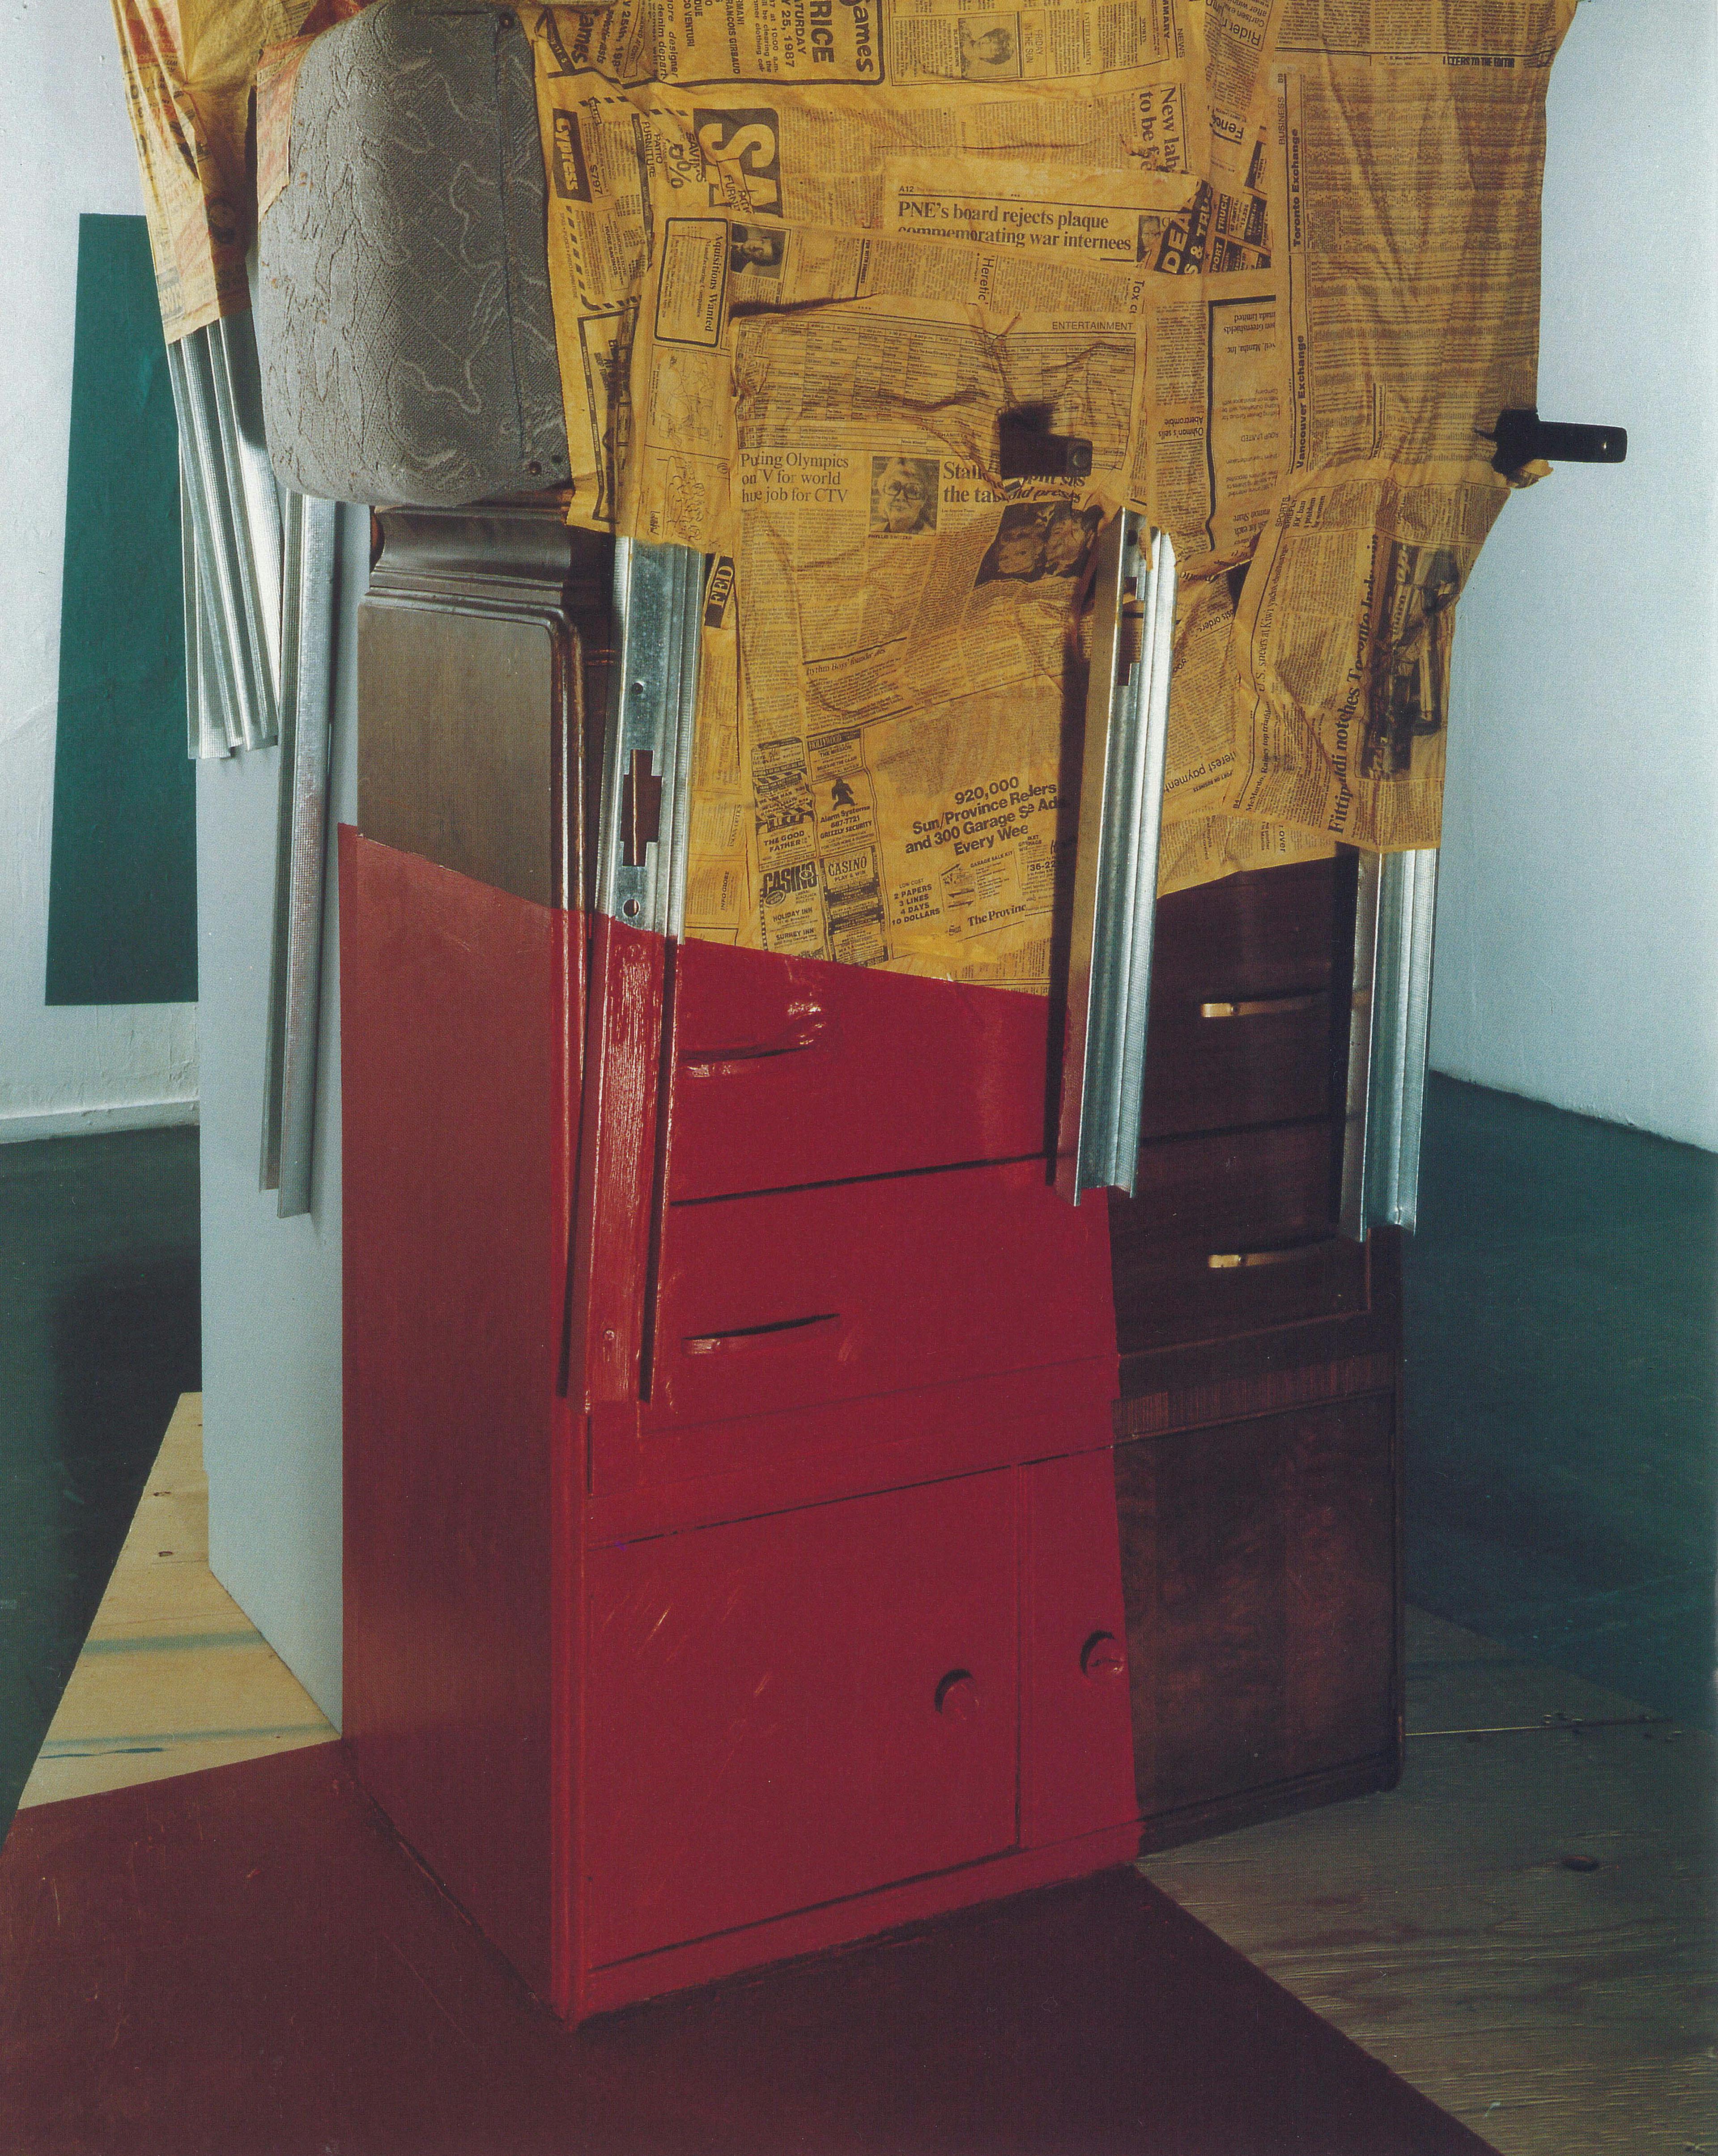 This is a close-up view of one of Jessica Stockholder’s sculptures installed in a gallery. A red-painted drawer sits on the floor. The top half of the furniture is covered by old newspapers. 